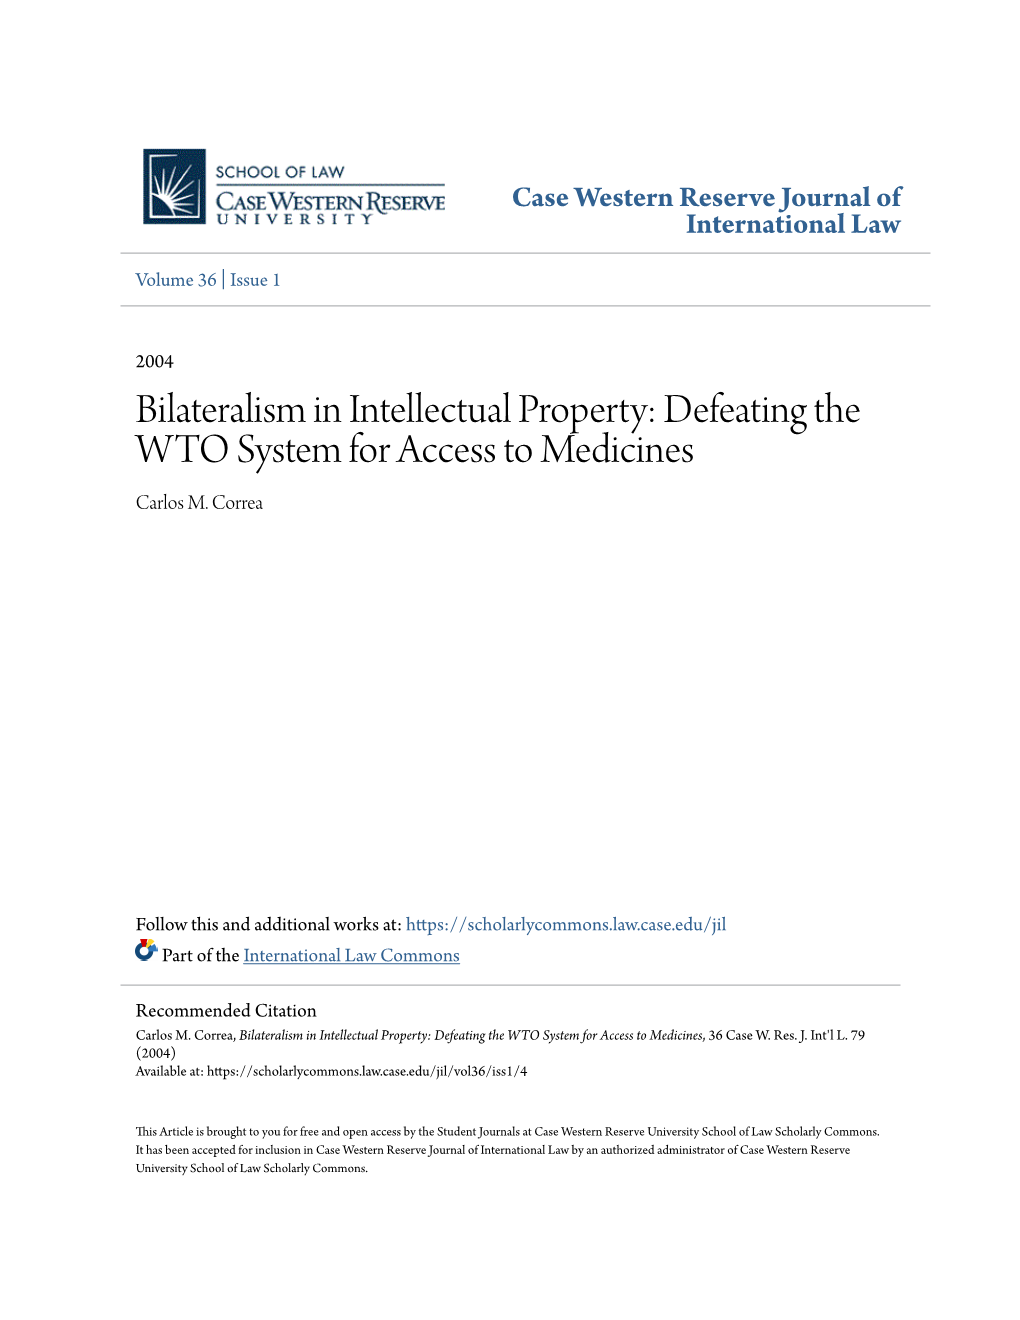 Bilateralism in Intellectual Property: Defeating the WTO System for Access to Medicines Carlos M